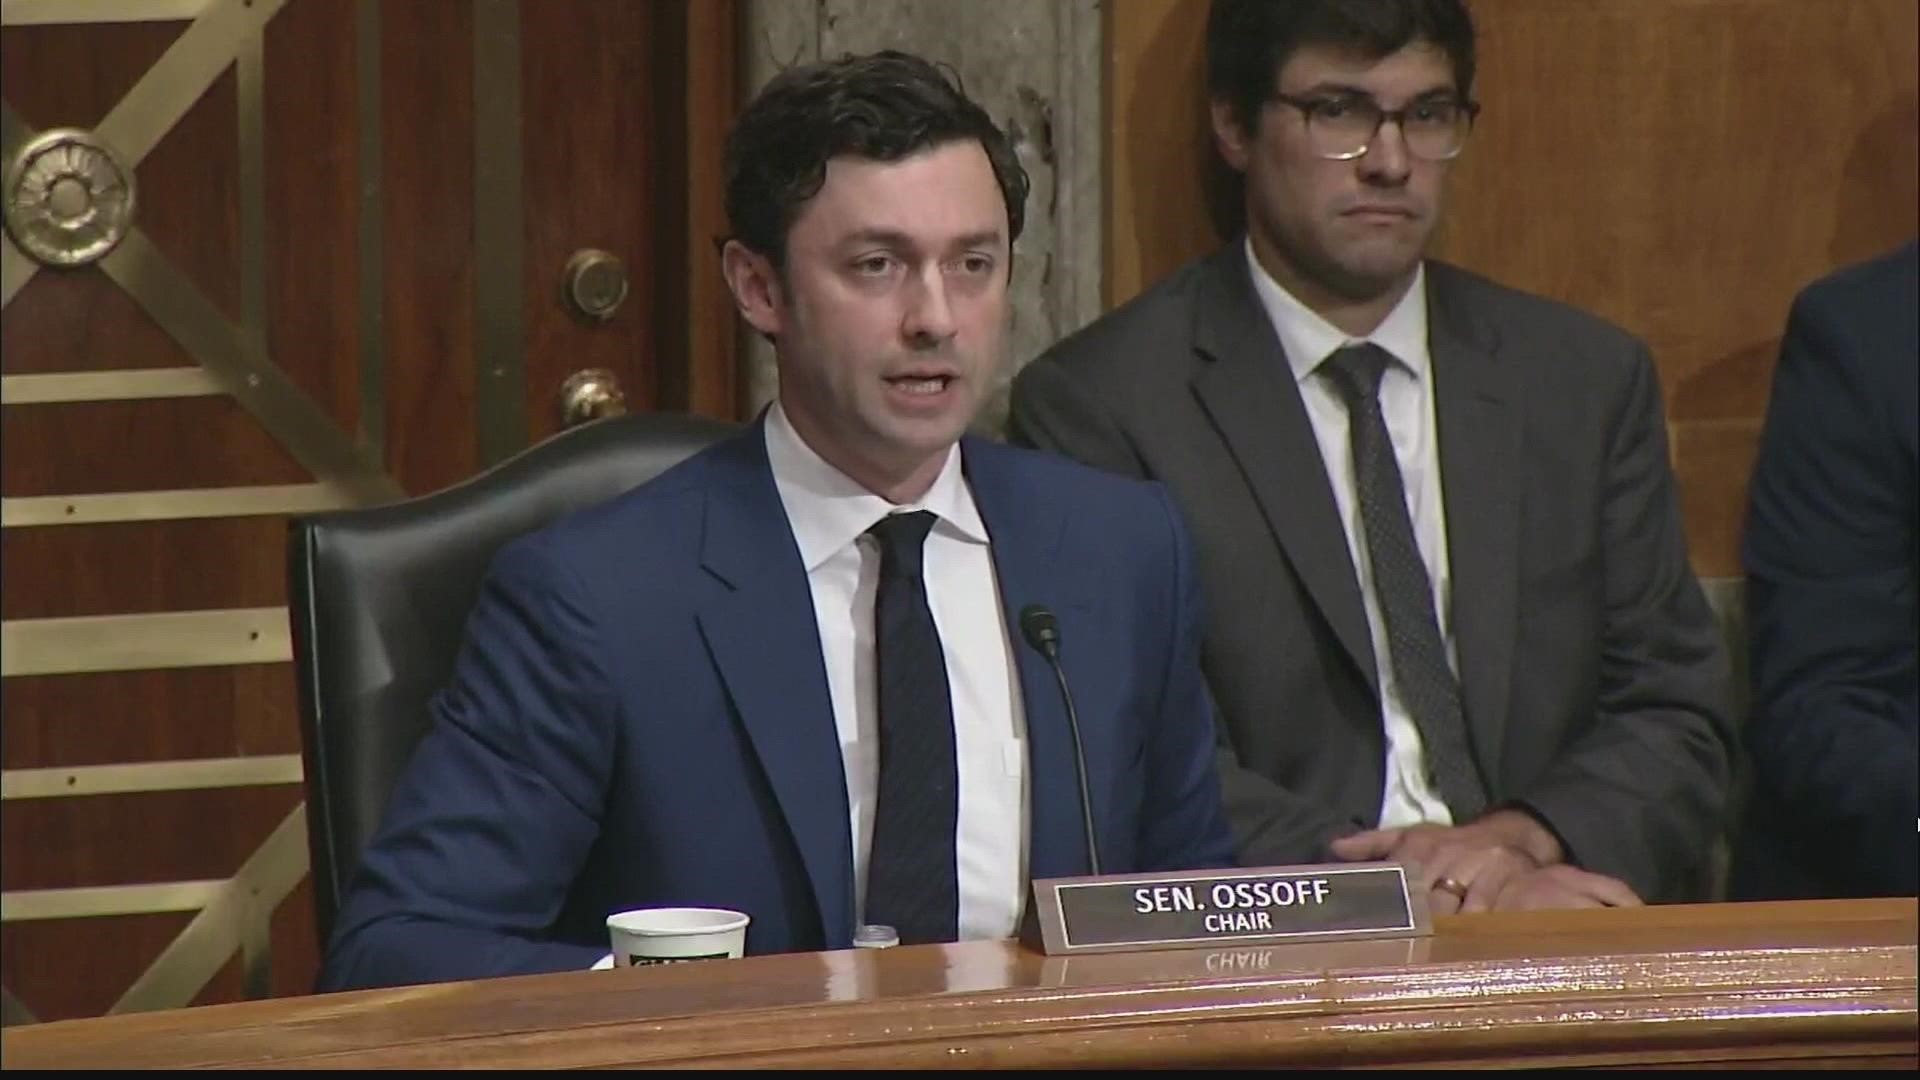 Sen. Ossoff says the DOJ needs to fix this issue internally and that new legislation could also help as well.